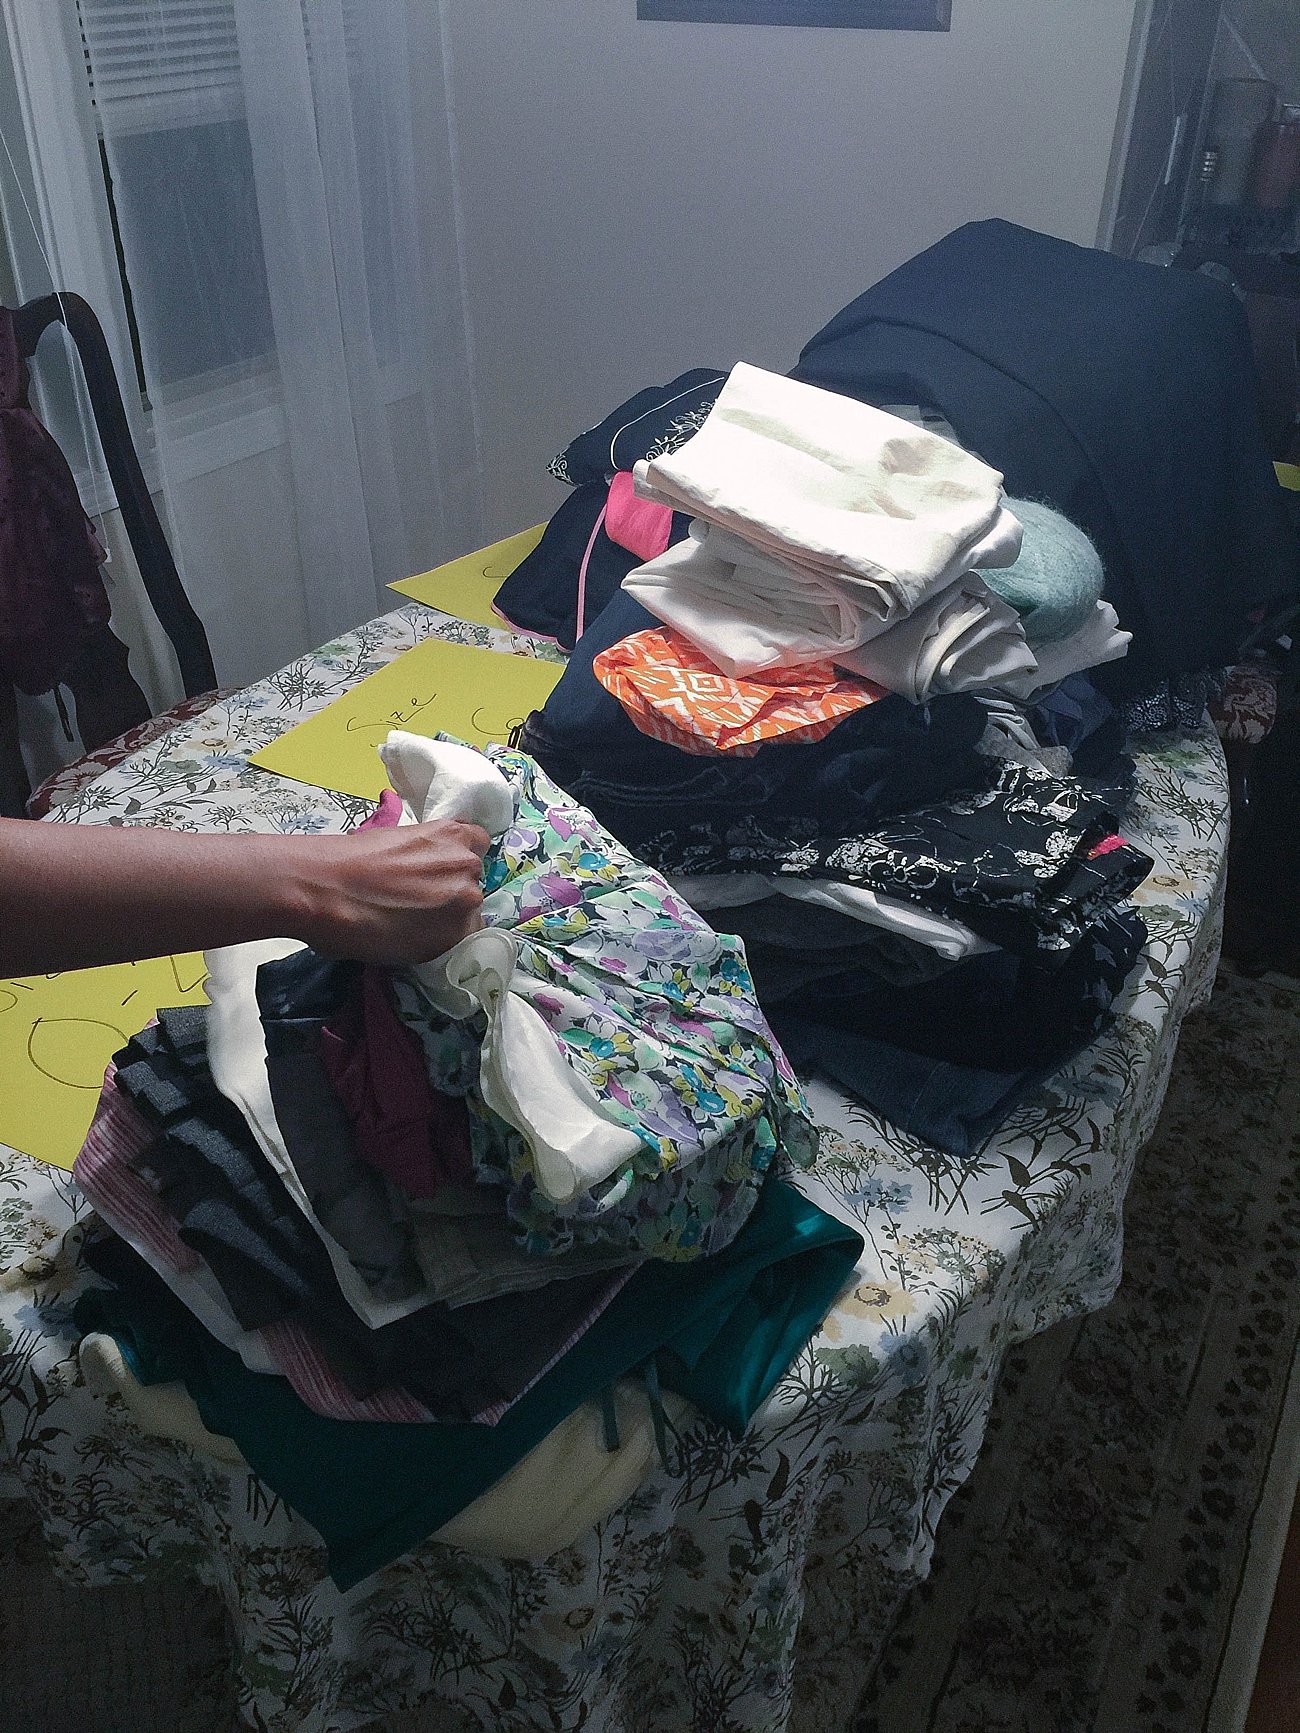 A Clothing Swap Party - An eco-friendly way to clean out and spice up your closet (1)